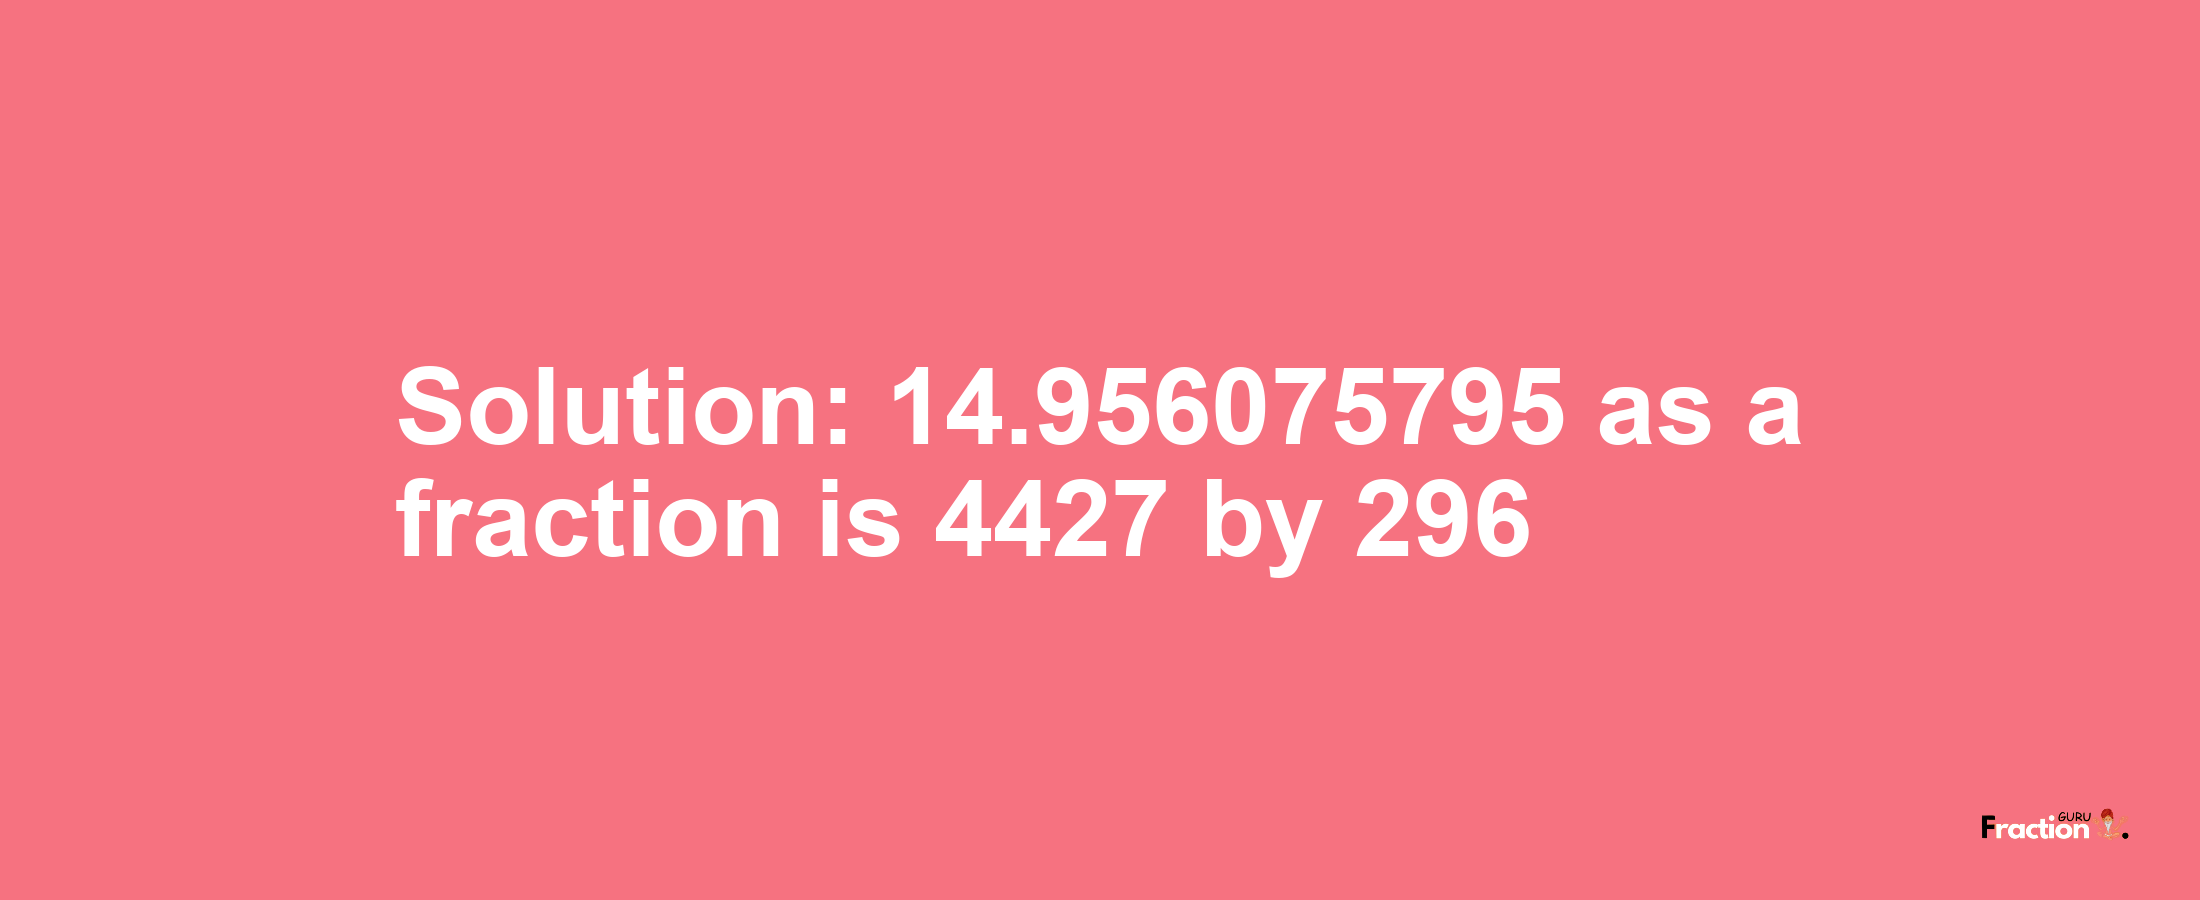 Solution:14.956075795 as a fraction is 4427/296